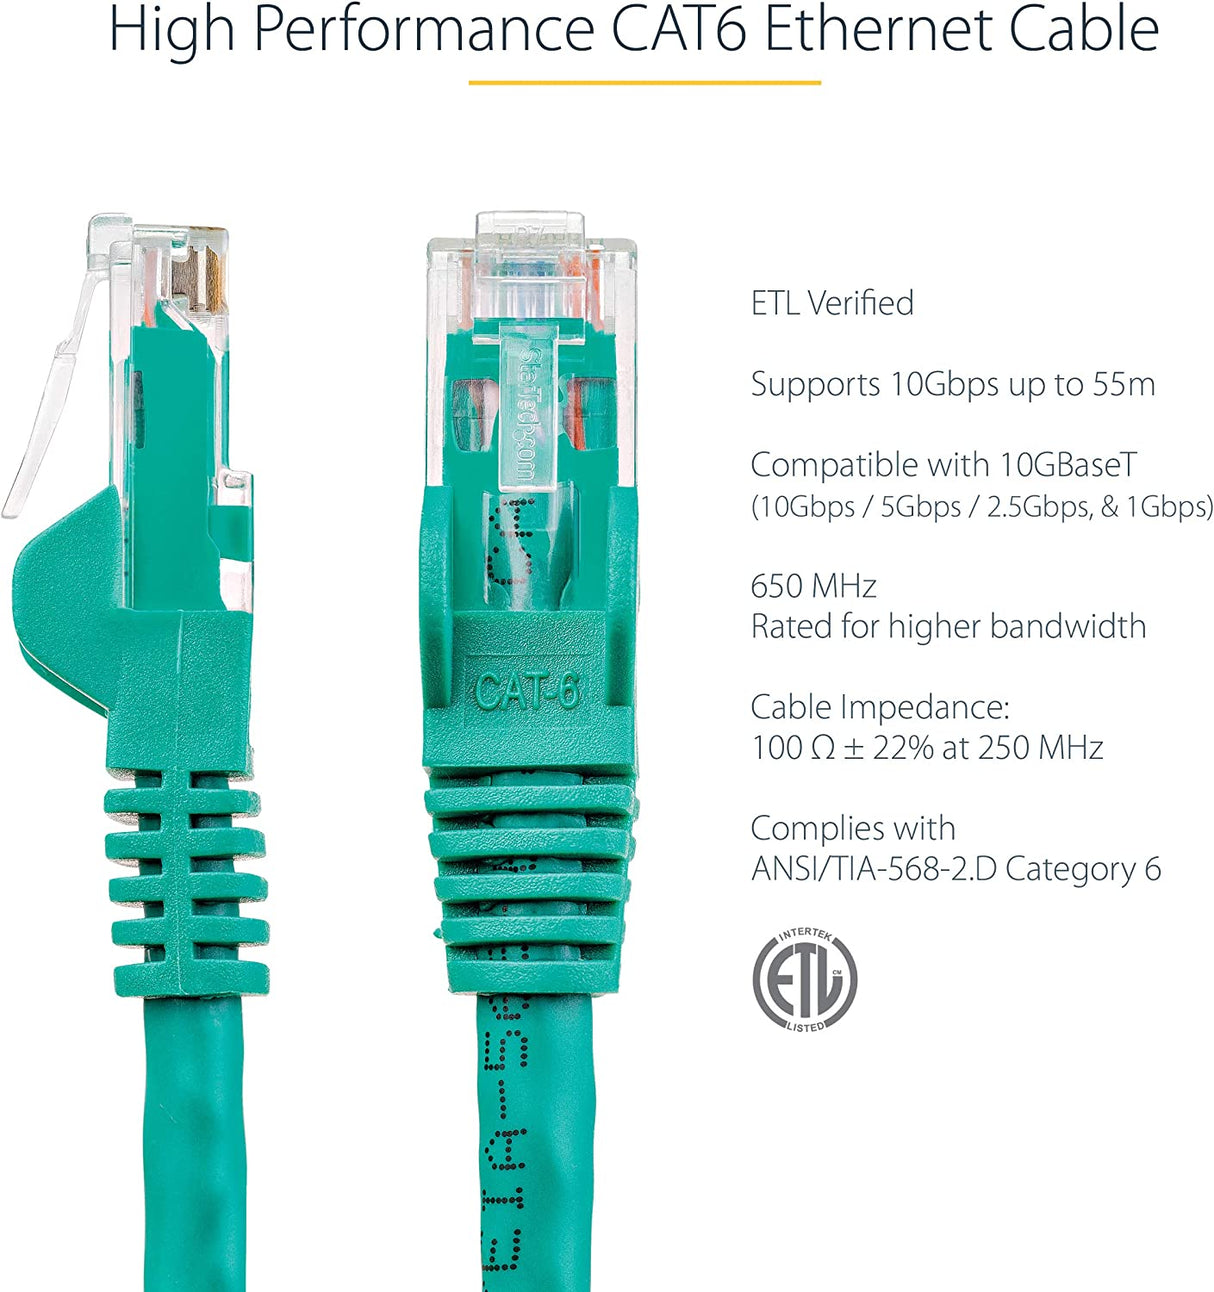 StarTech.com 1ft CAT6 Ethernet Cable - Green CAT 6 Gigabit Ethernet Wire -650MHz 100W PoE RJ45 UTP Network/Patch Cord Snagless w/Strain Relief Fluke Tested/Wiring is UL Certified/TIA (N6PATCH1GN) Green 1 ft / 0.3 m 1 Pack